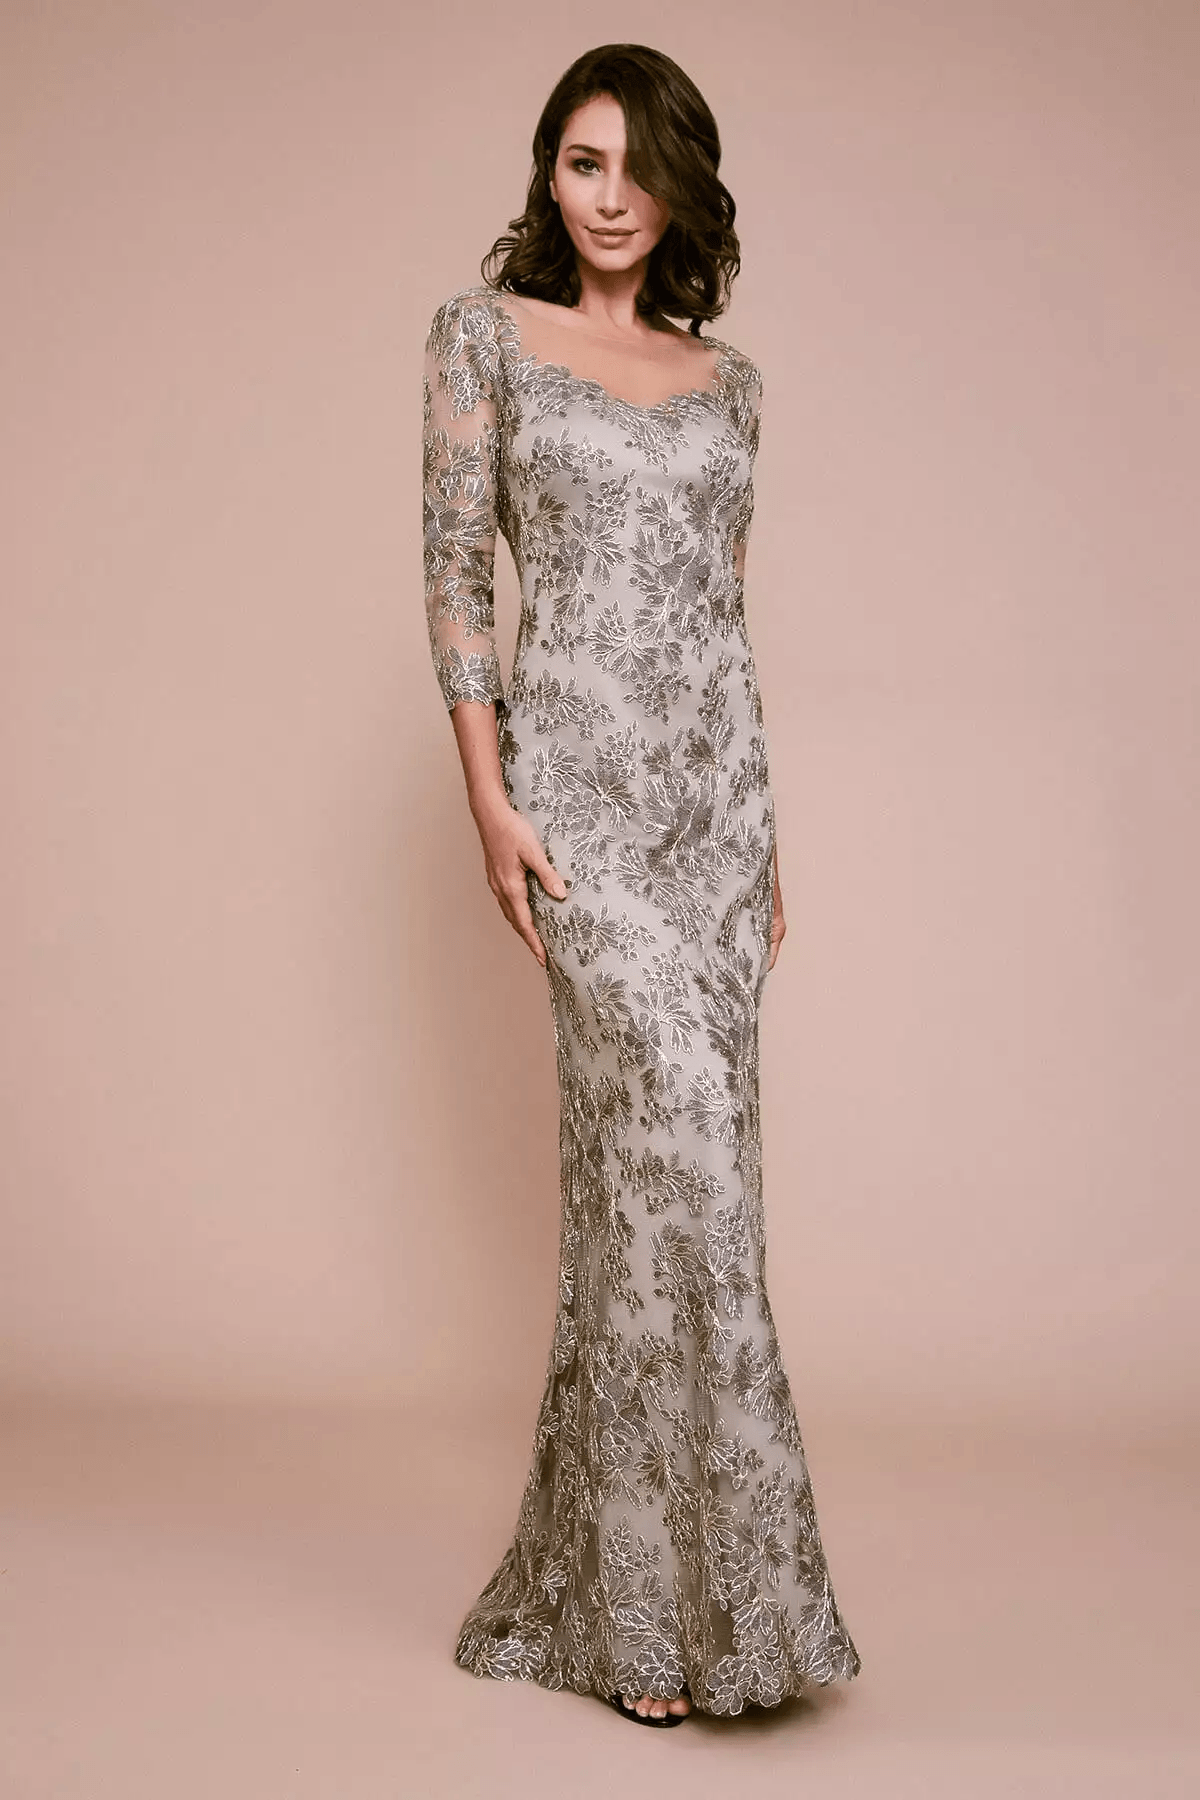 Outfits for Brides Mothers 20 Latest Mother of the Bride Dresses